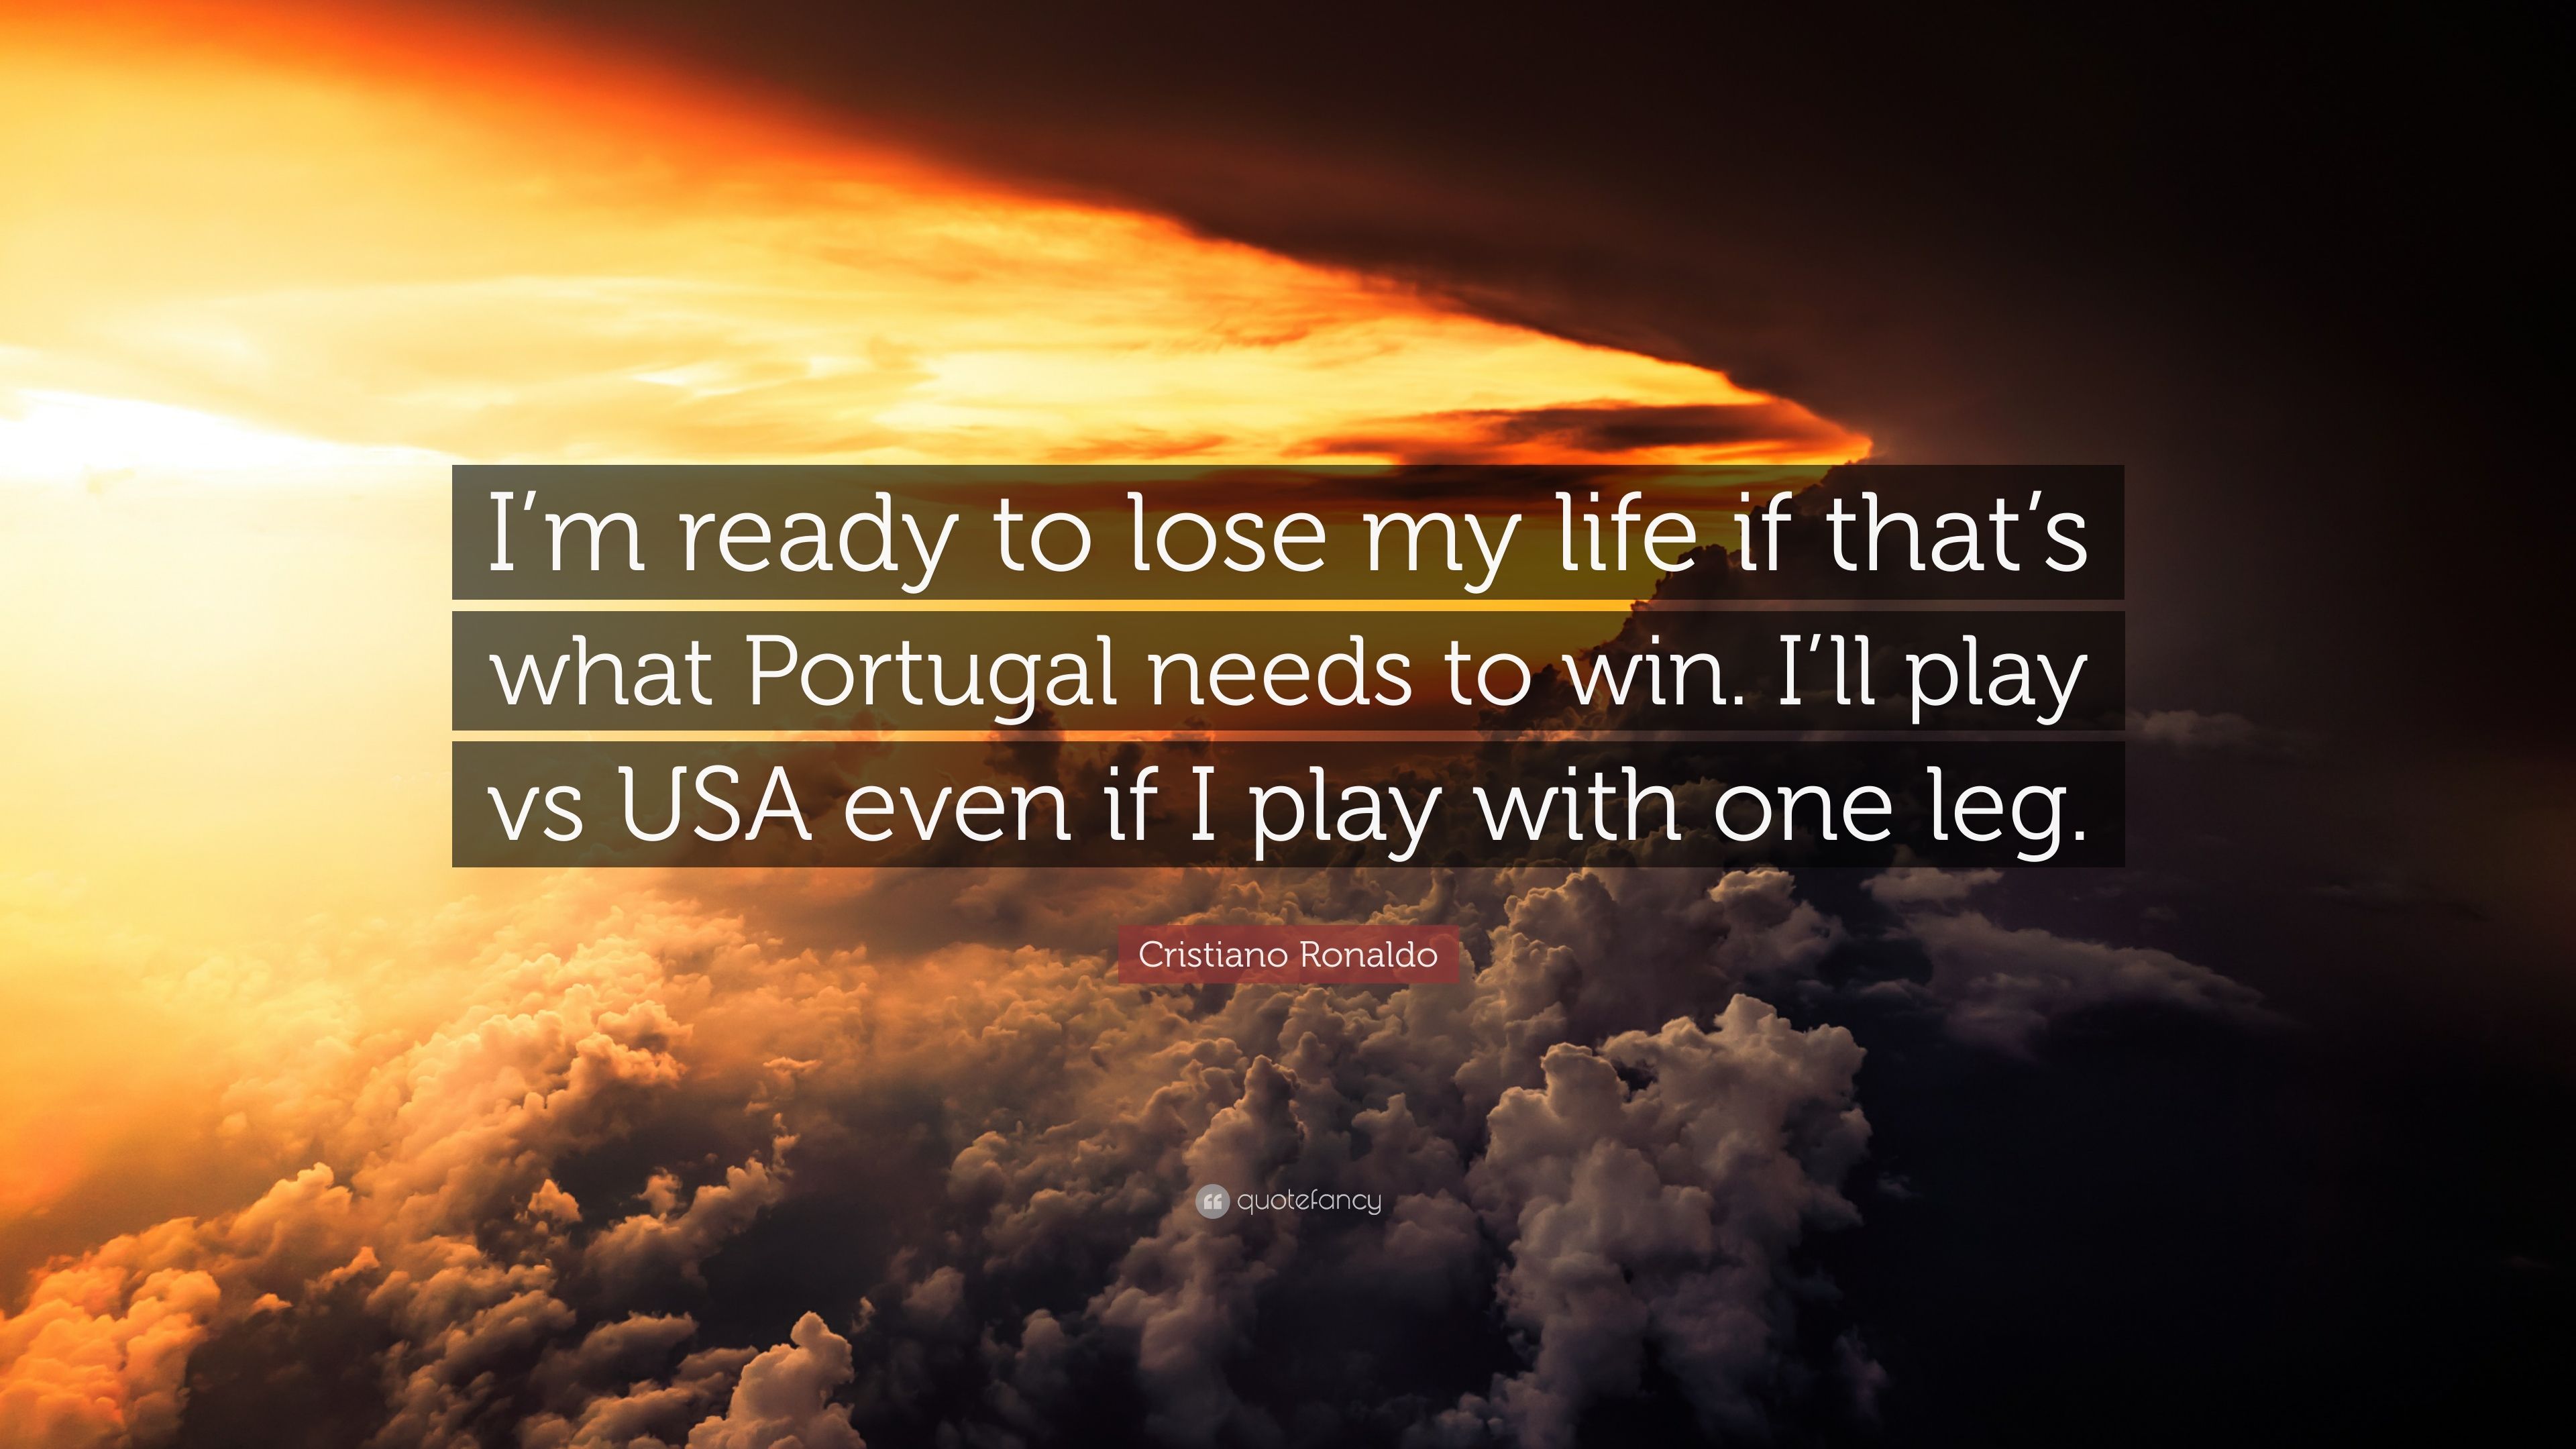 Cristiano Ronaldo Quote: “I'm ready to lose my life if that's what